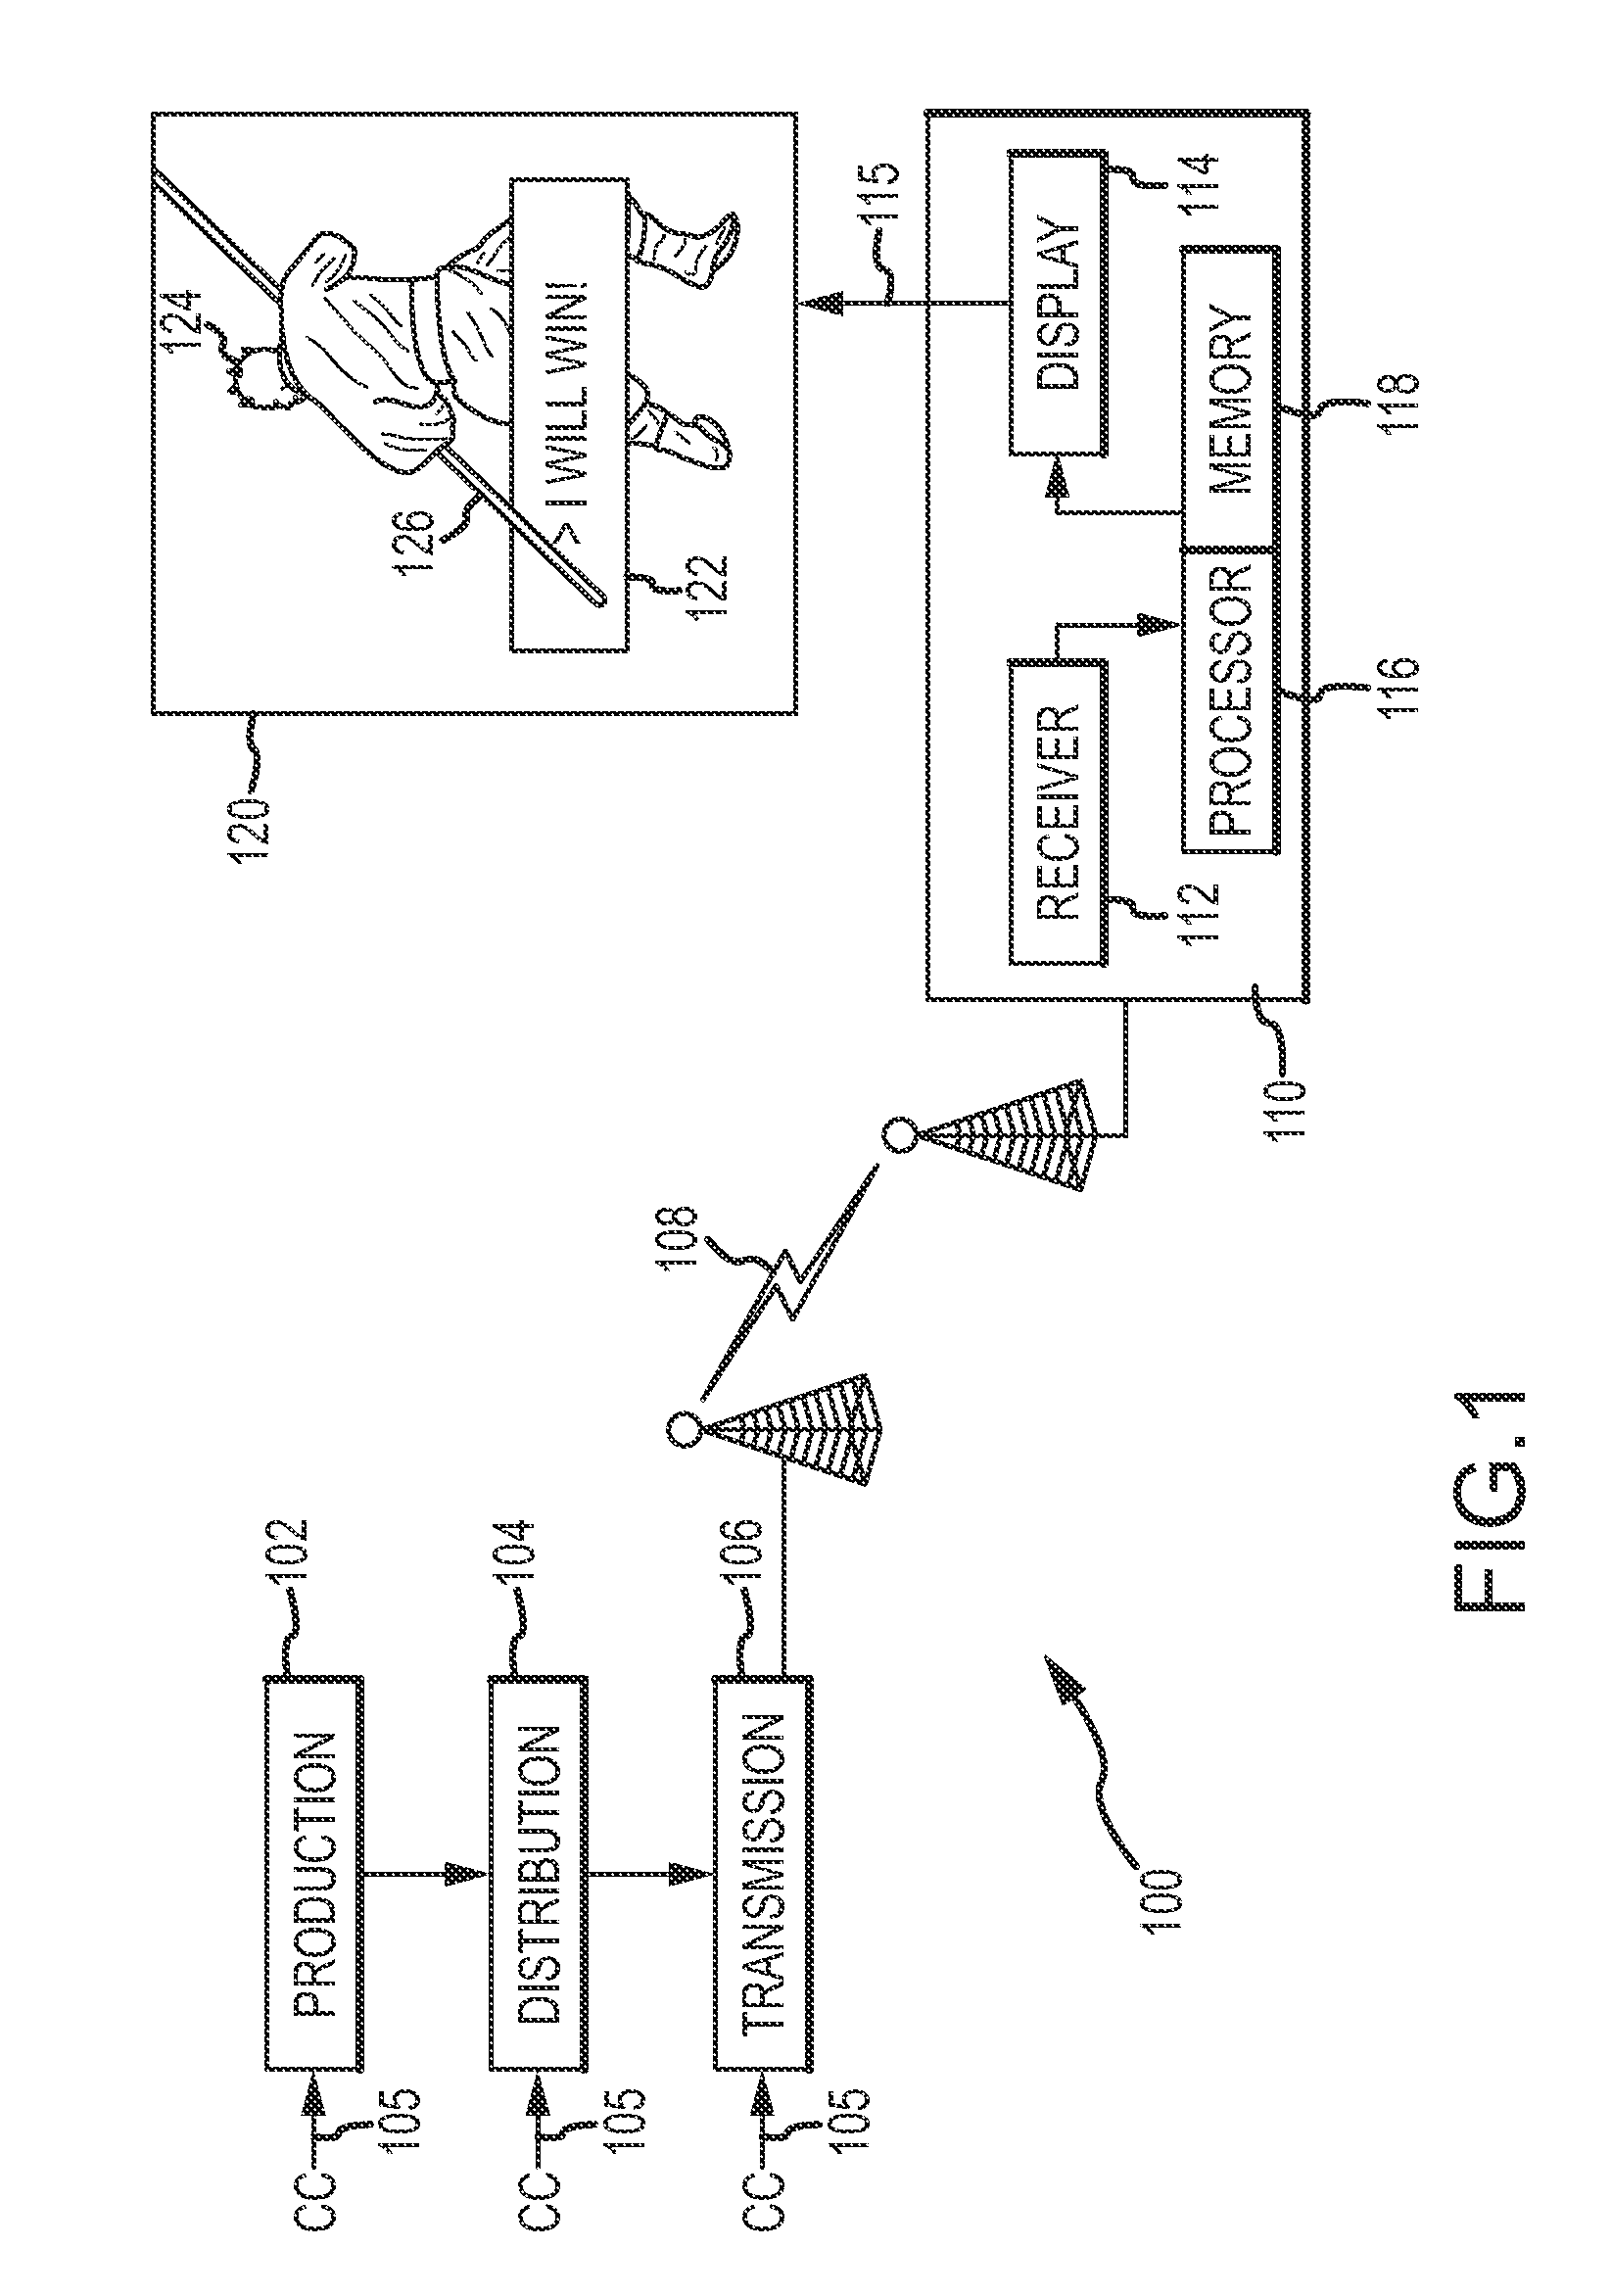 Systems and methods for providing closed captioning in three-dimensional imagery